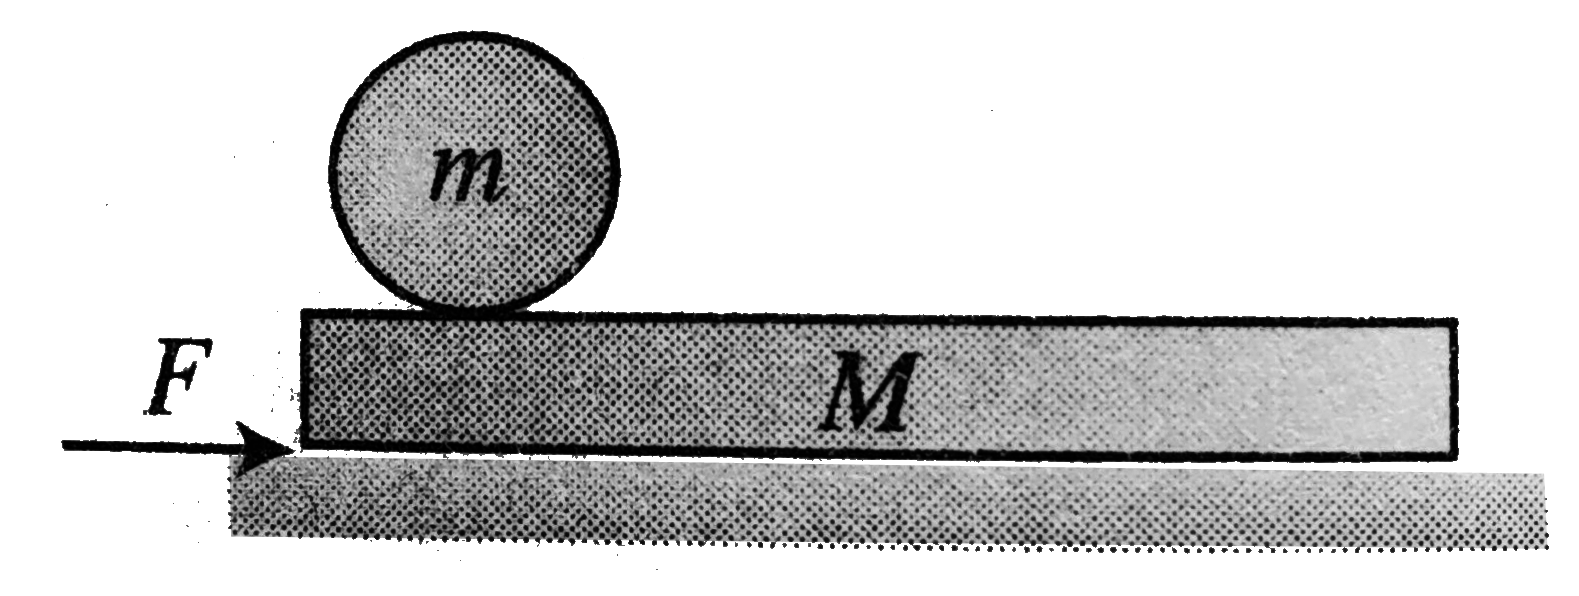 A sphere of mass m and radius r is placed on a rough plank of mass M. The system is placed on a smooth horizontal surface. A constant force F is applied on the plank such that the sphere rolls purely on the plank. Find the acceleration of the sphere.